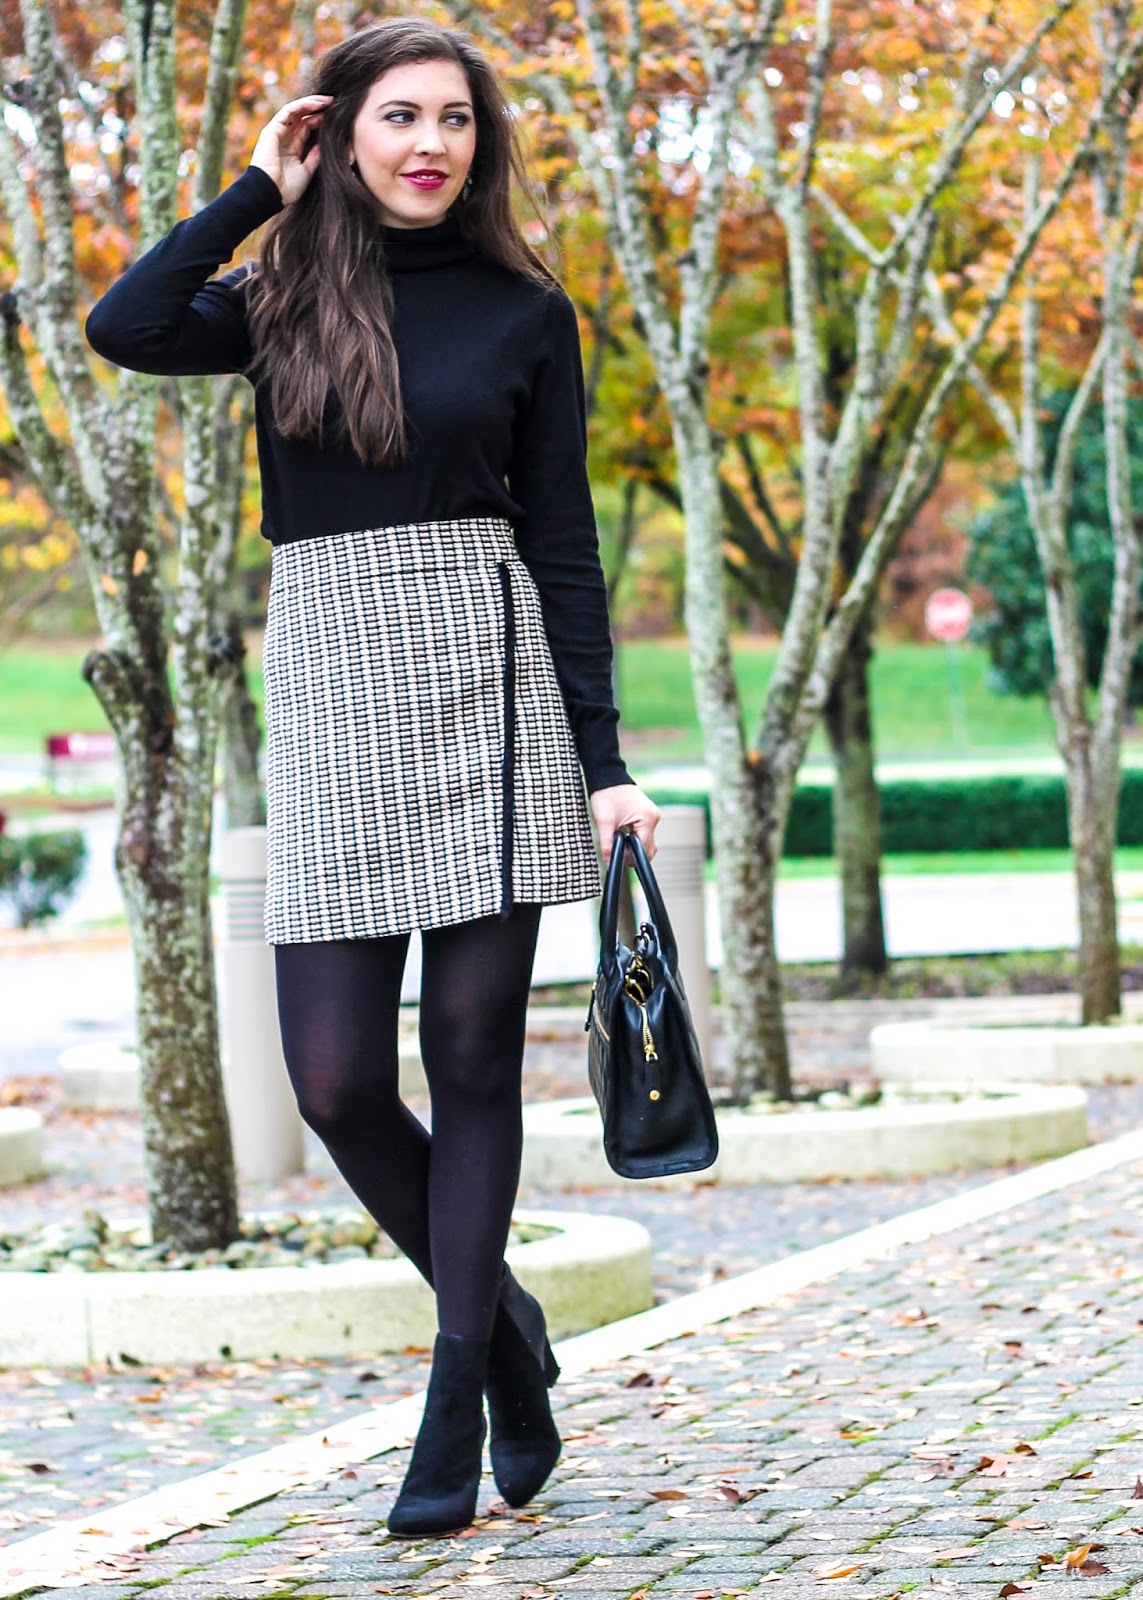 Tweed Mini Skirt, Highwaisted Skirt, Classic Look for fall, work appropriate outfit for fall, work appropriate outfit for winter, winter outfit, cute thanksgiving outfit, black turtleneck sweater, jcrew skirt, black suede ivanka trump booties, vera bradley satchel, fashion blogger, fashion blog, style blogger, pretty in the pines, black tights with skirt, fall trends, winter trends